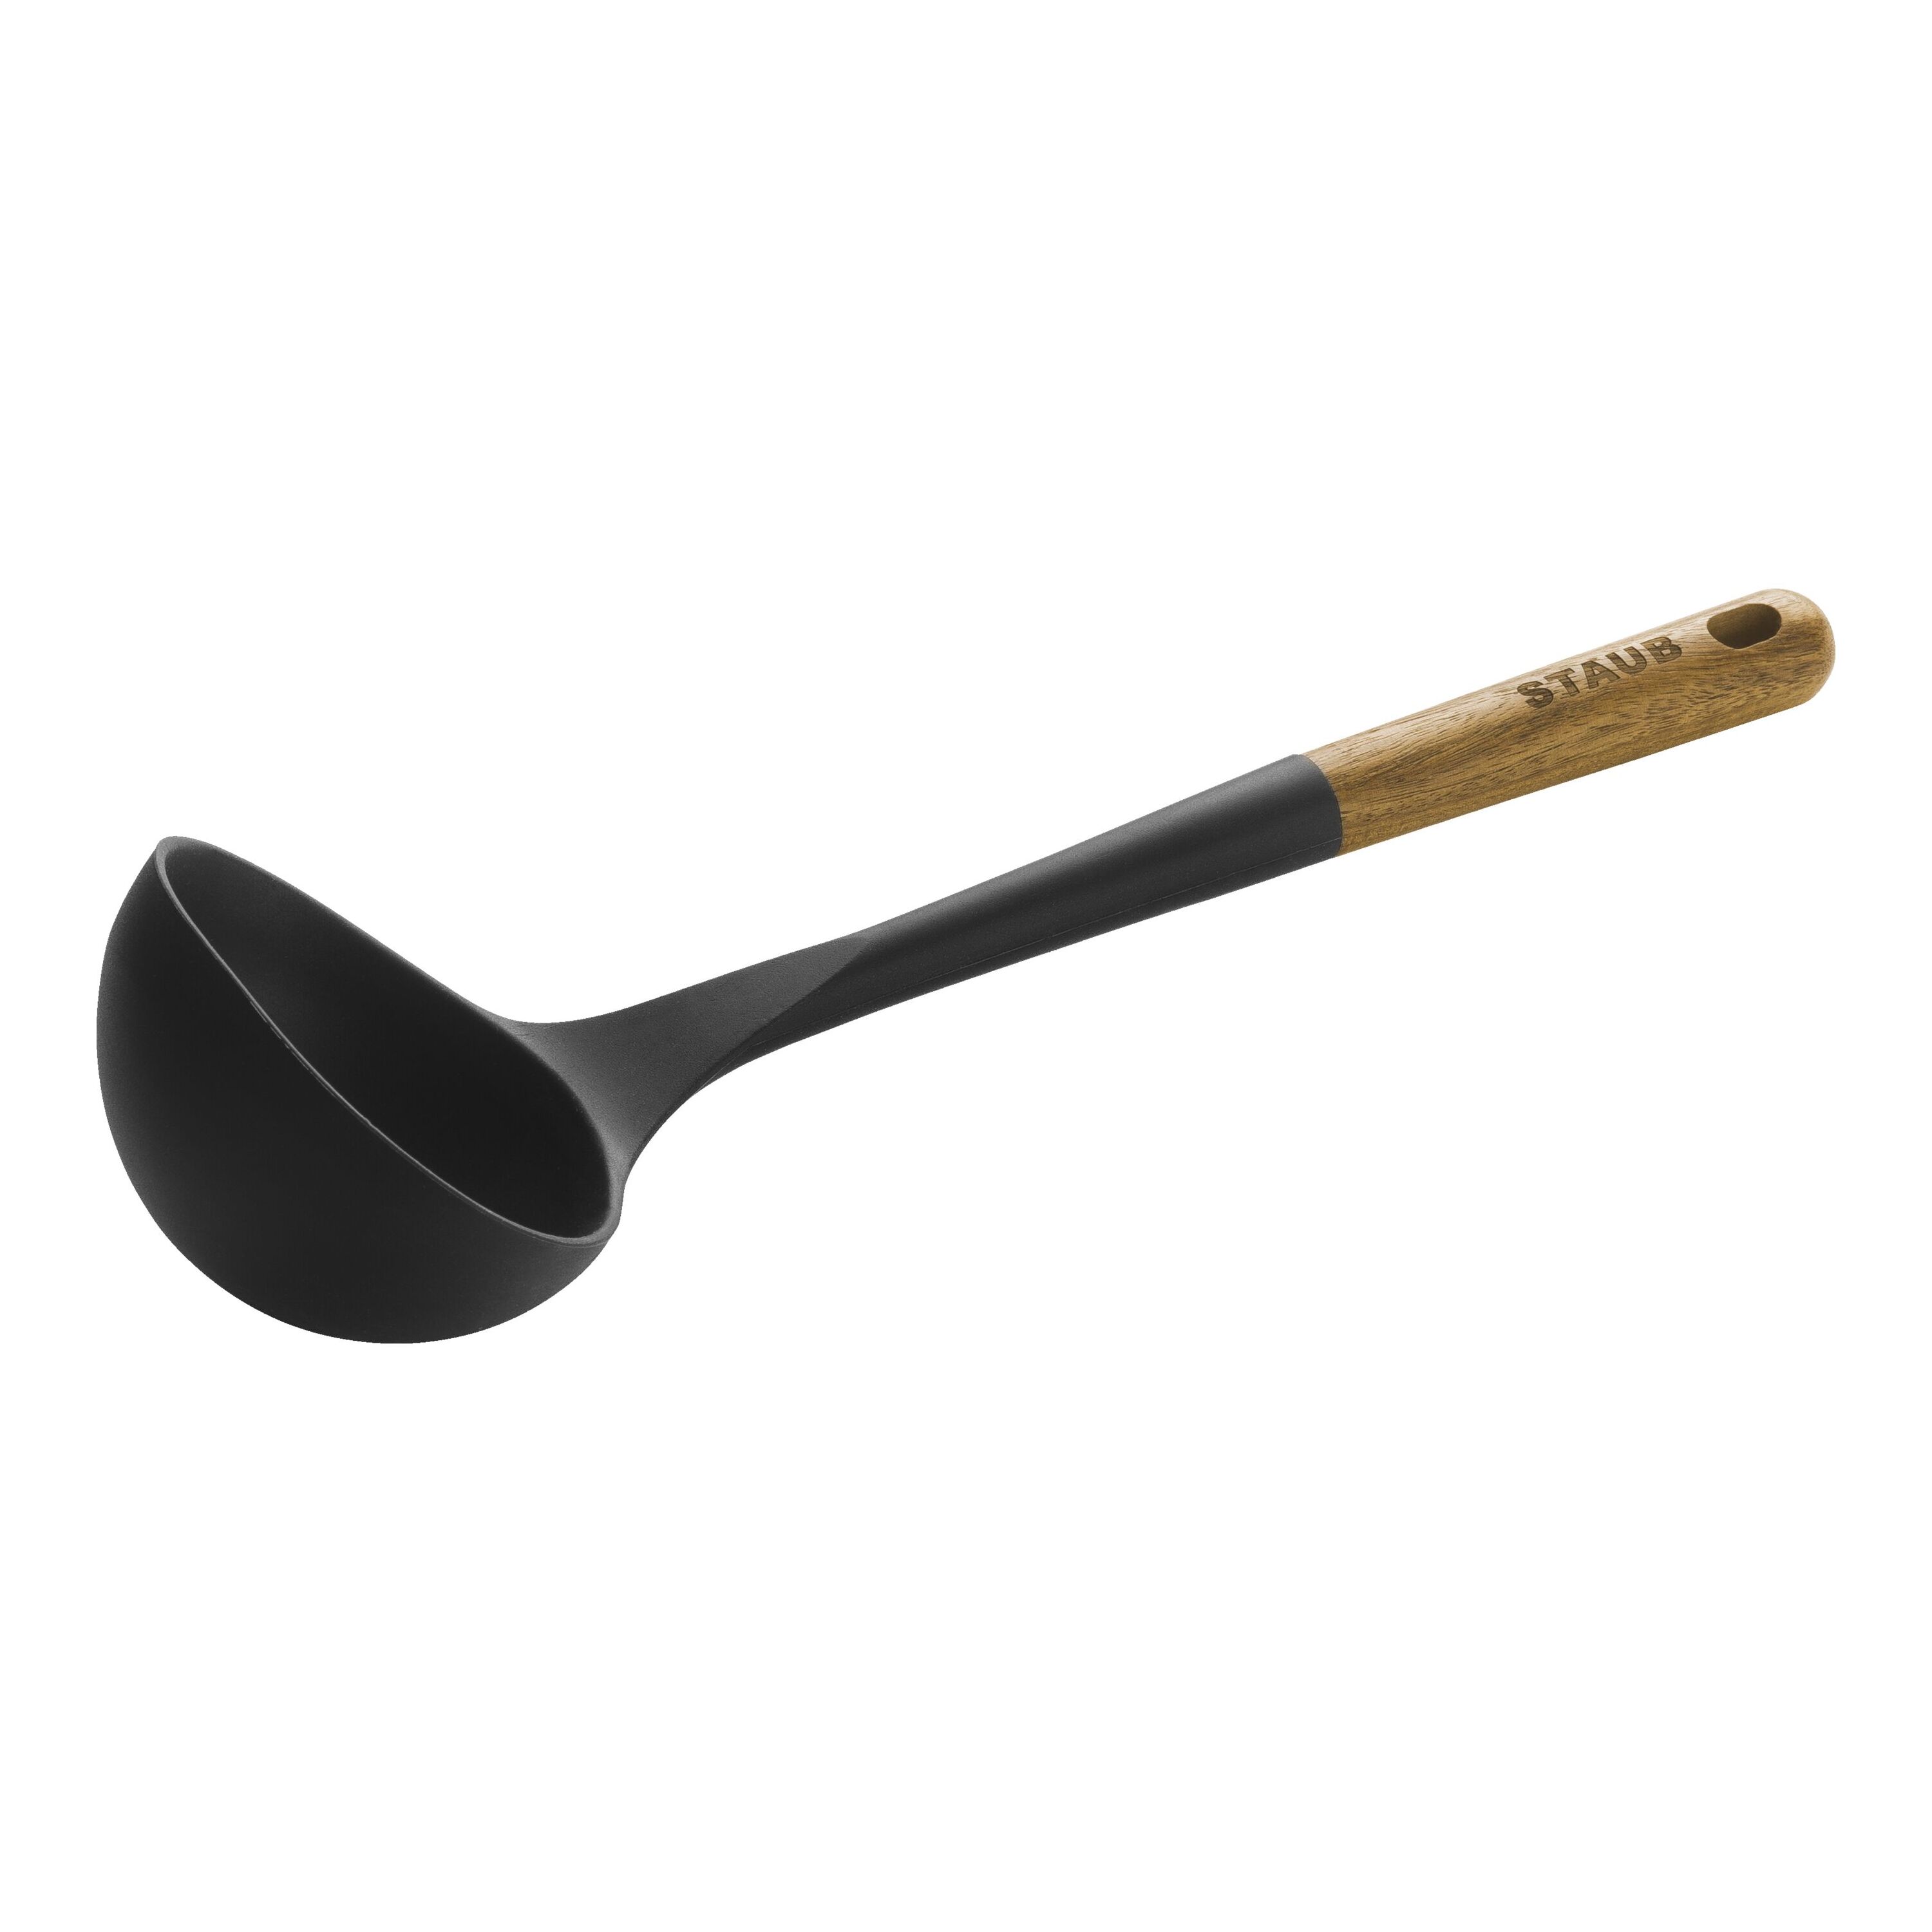 Culinary Edge Better Quality Soup Ladles with Stainless Steel Handle Inserts